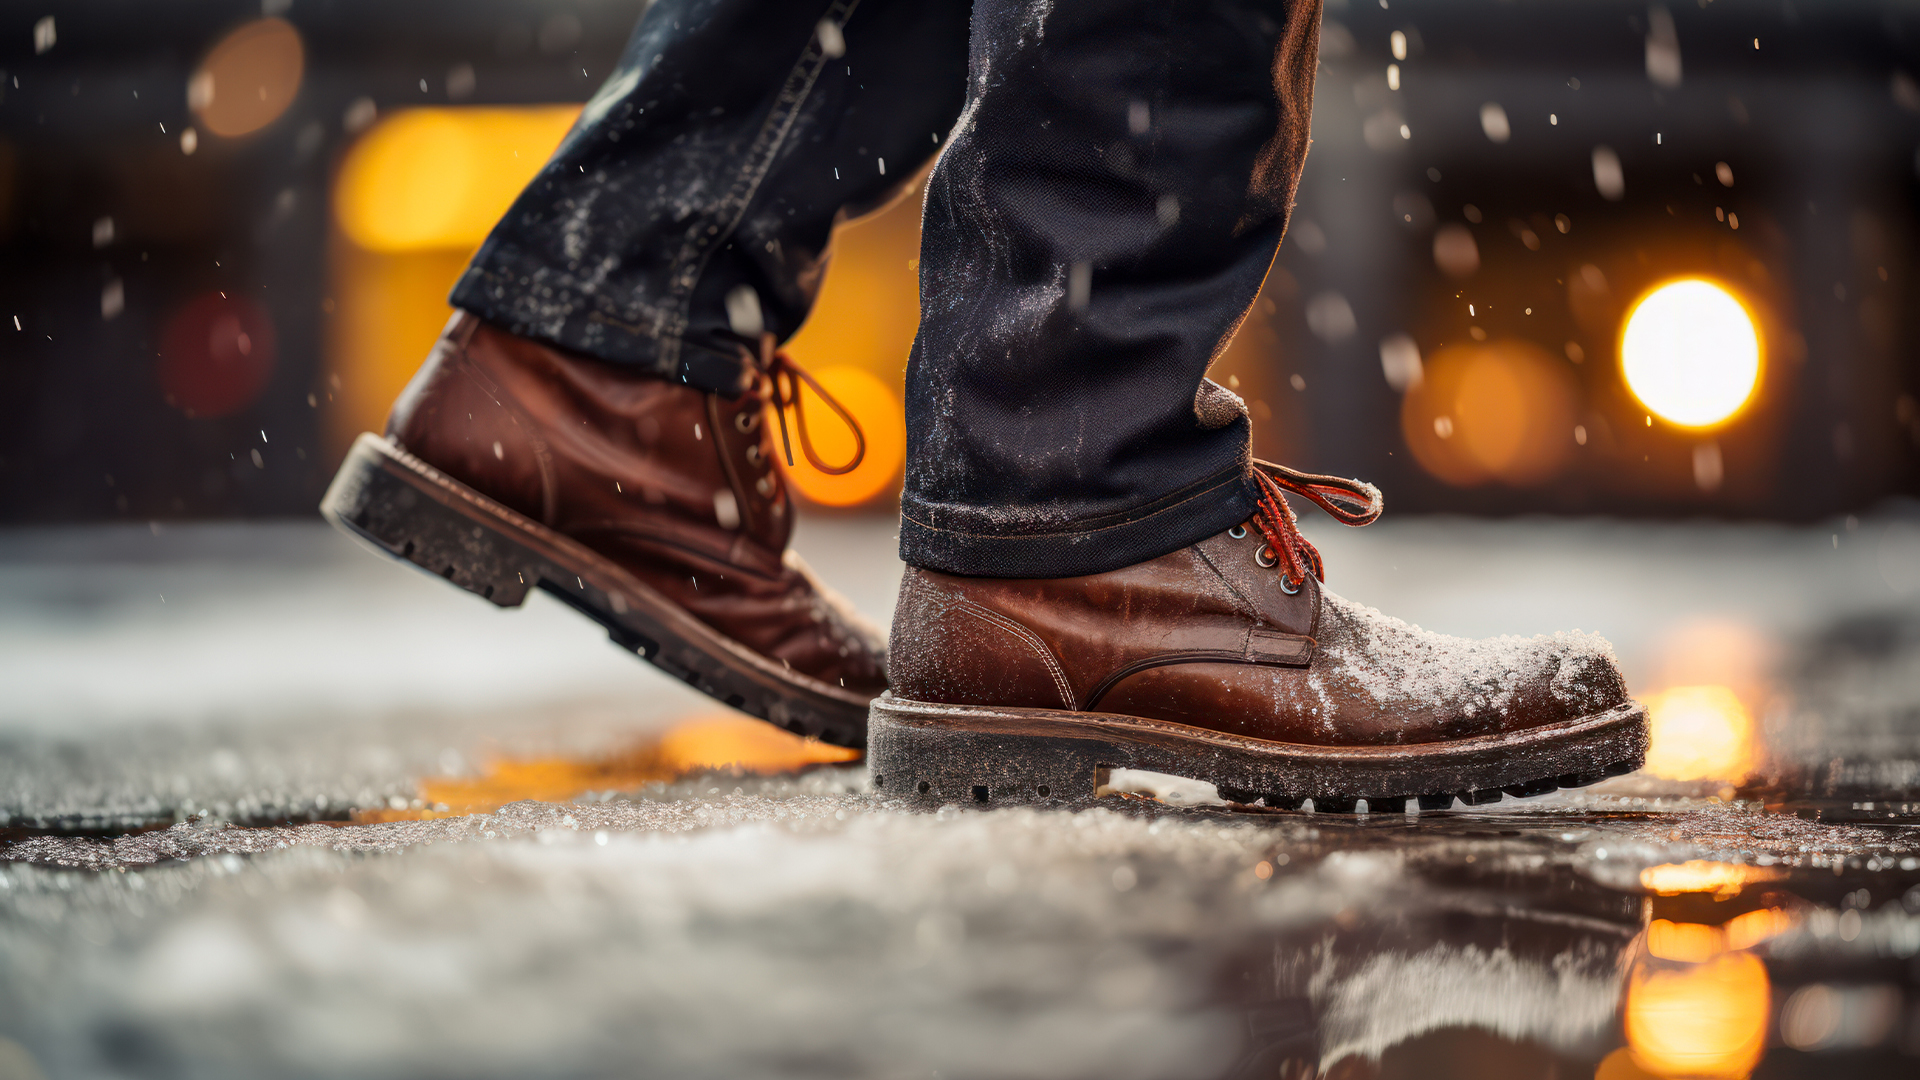 Close-up of a man's shoes walking in snowy street, side view